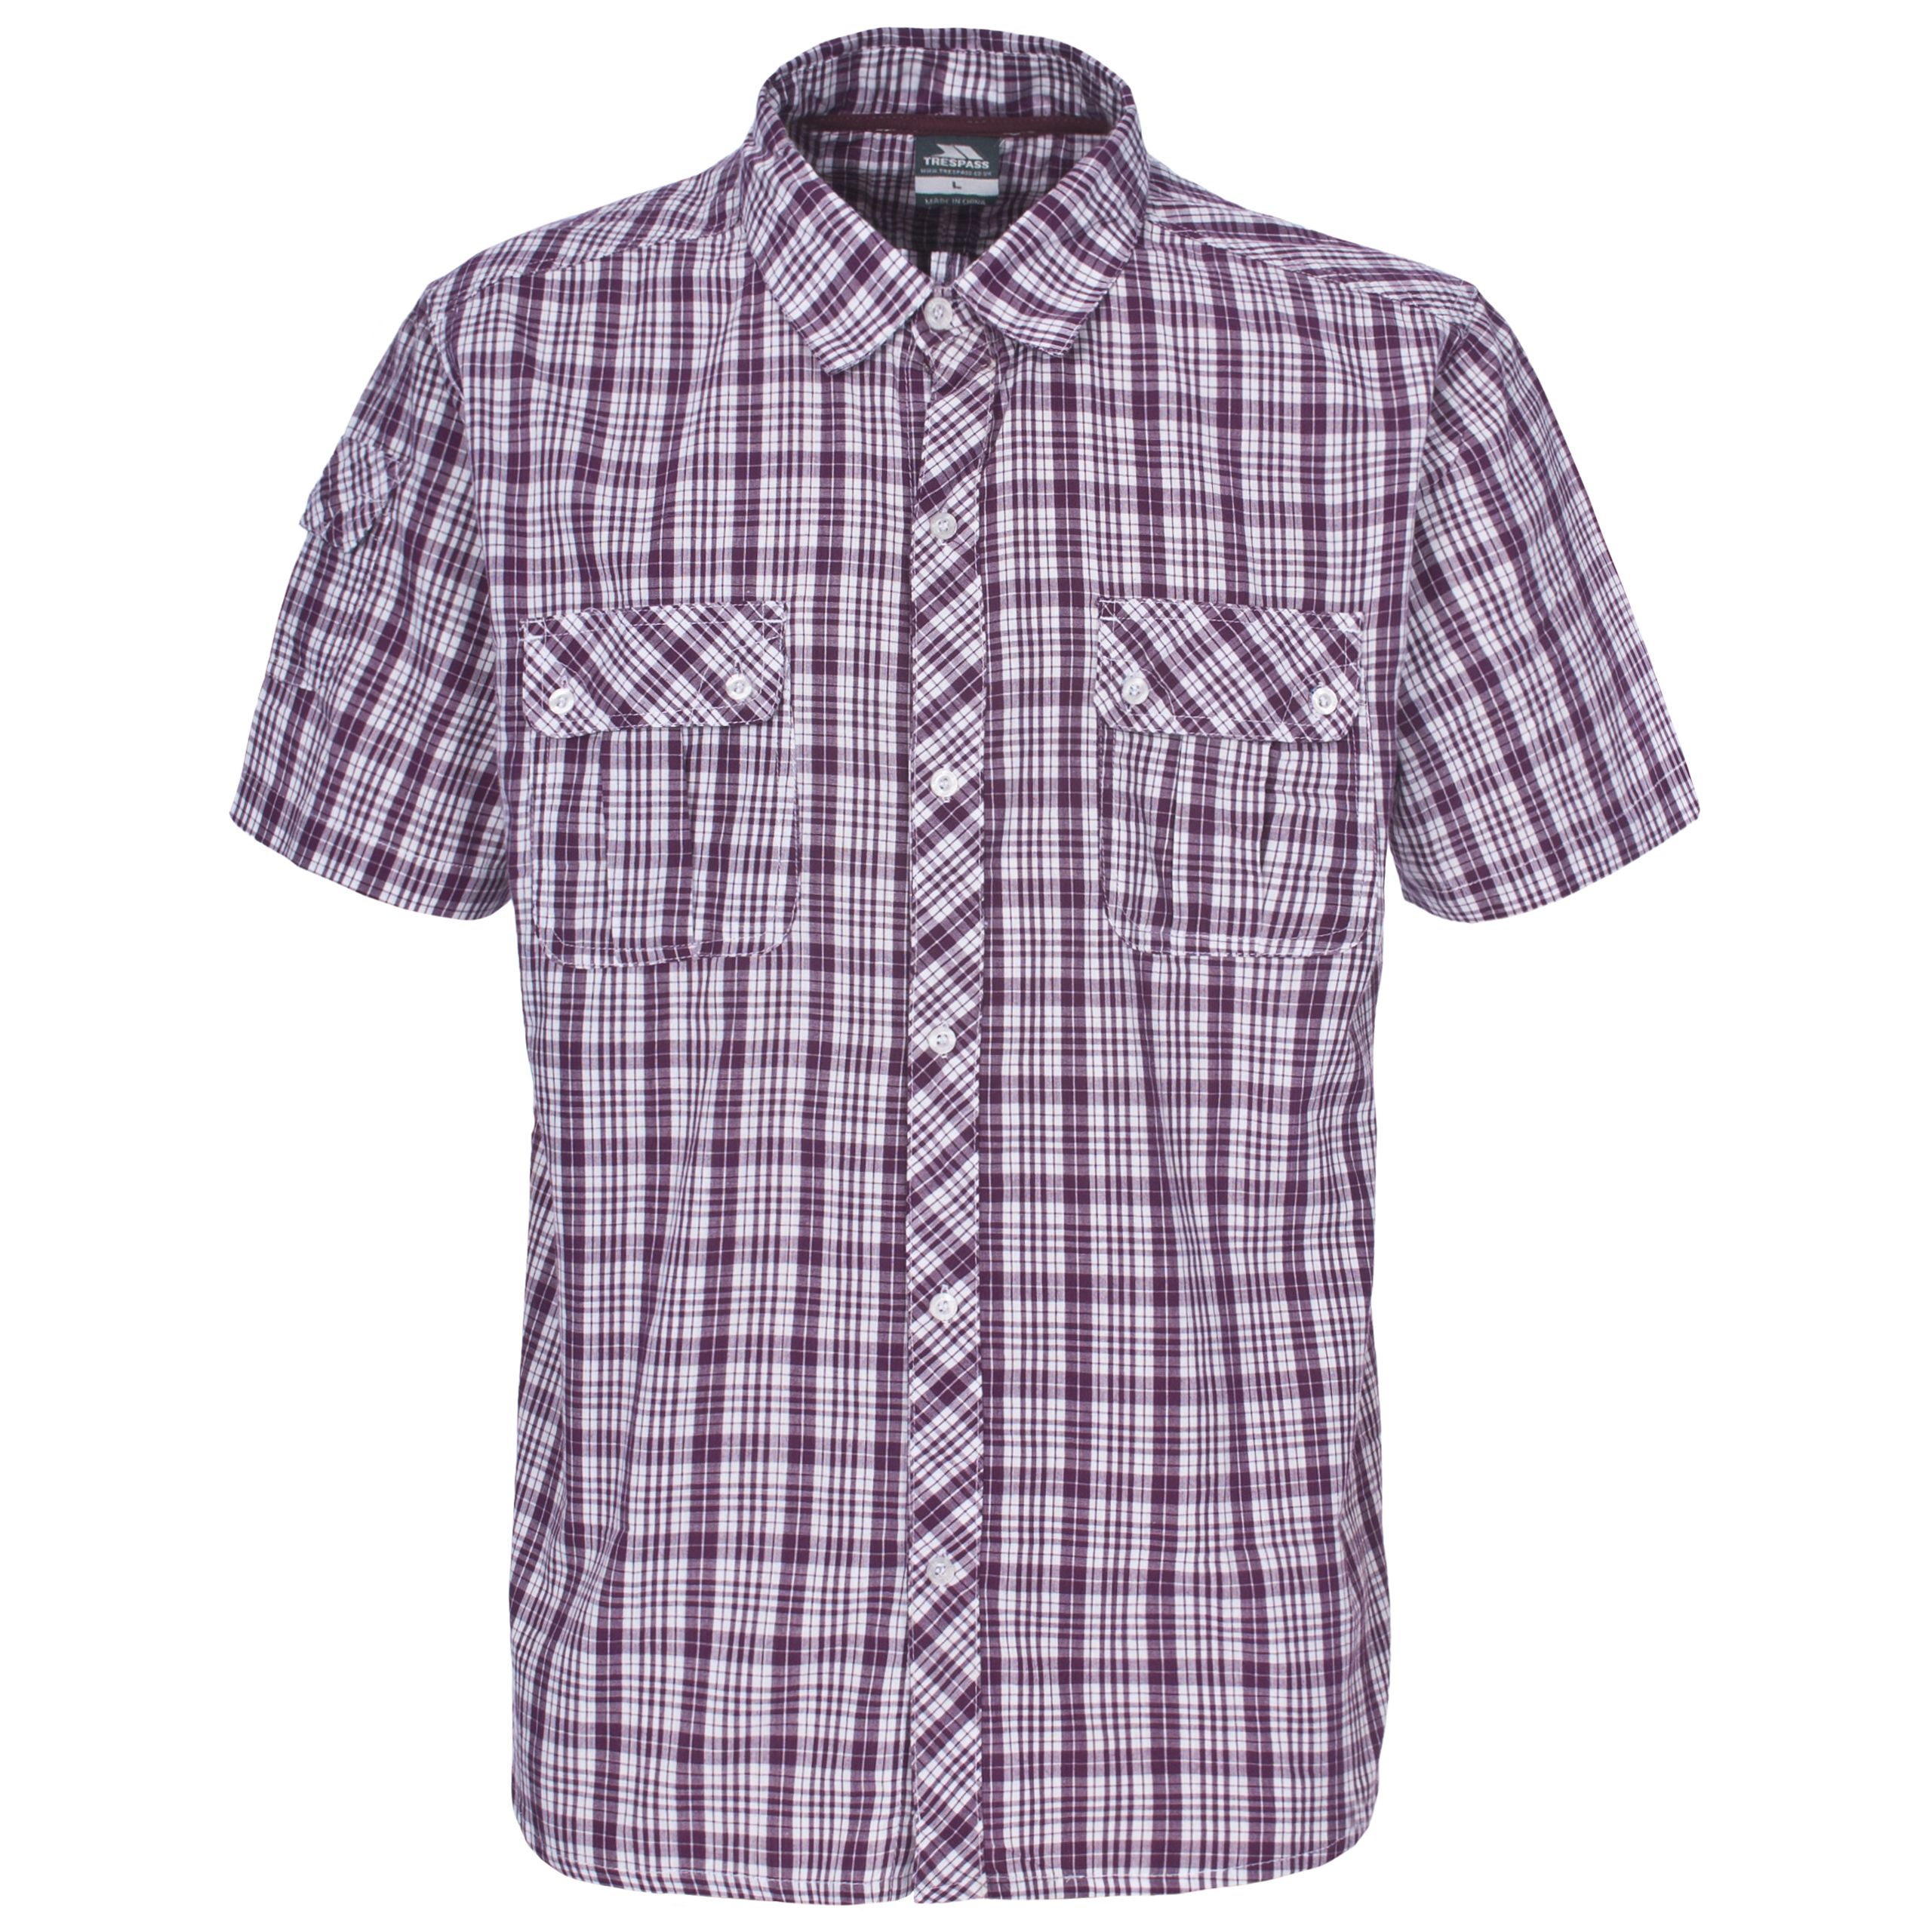 Tolpis Mens Short Sleeve Checked Shirt